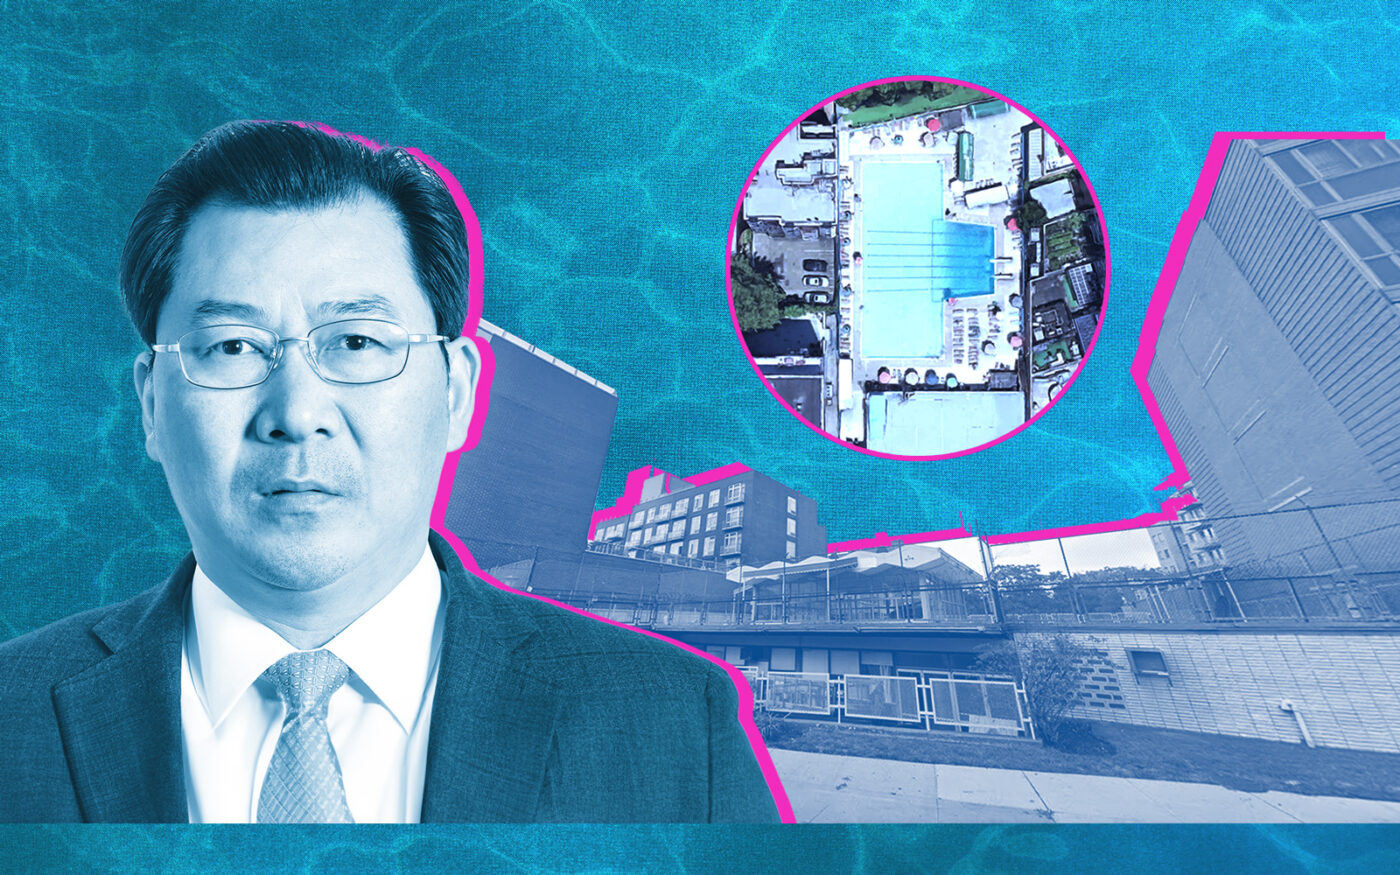 Jiashu Xu is planning two residential buildings to replace one former pool club in Flushing